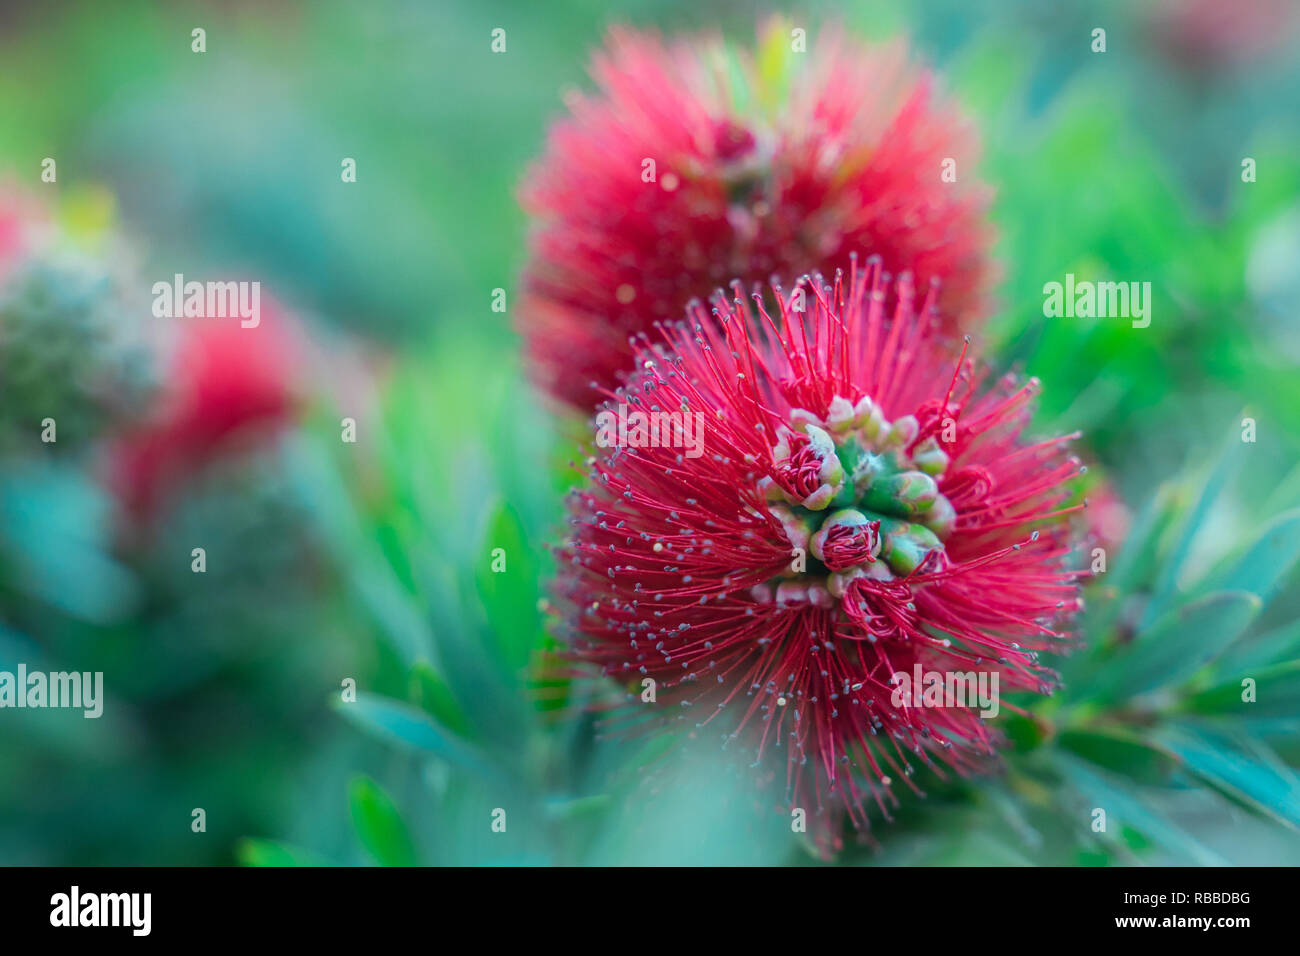 Melaleuca citrina. A close up to (Callistemon).A red flower bottle brush tree the name derives from the plant's flowers which look like brushes for cl Stock Photo